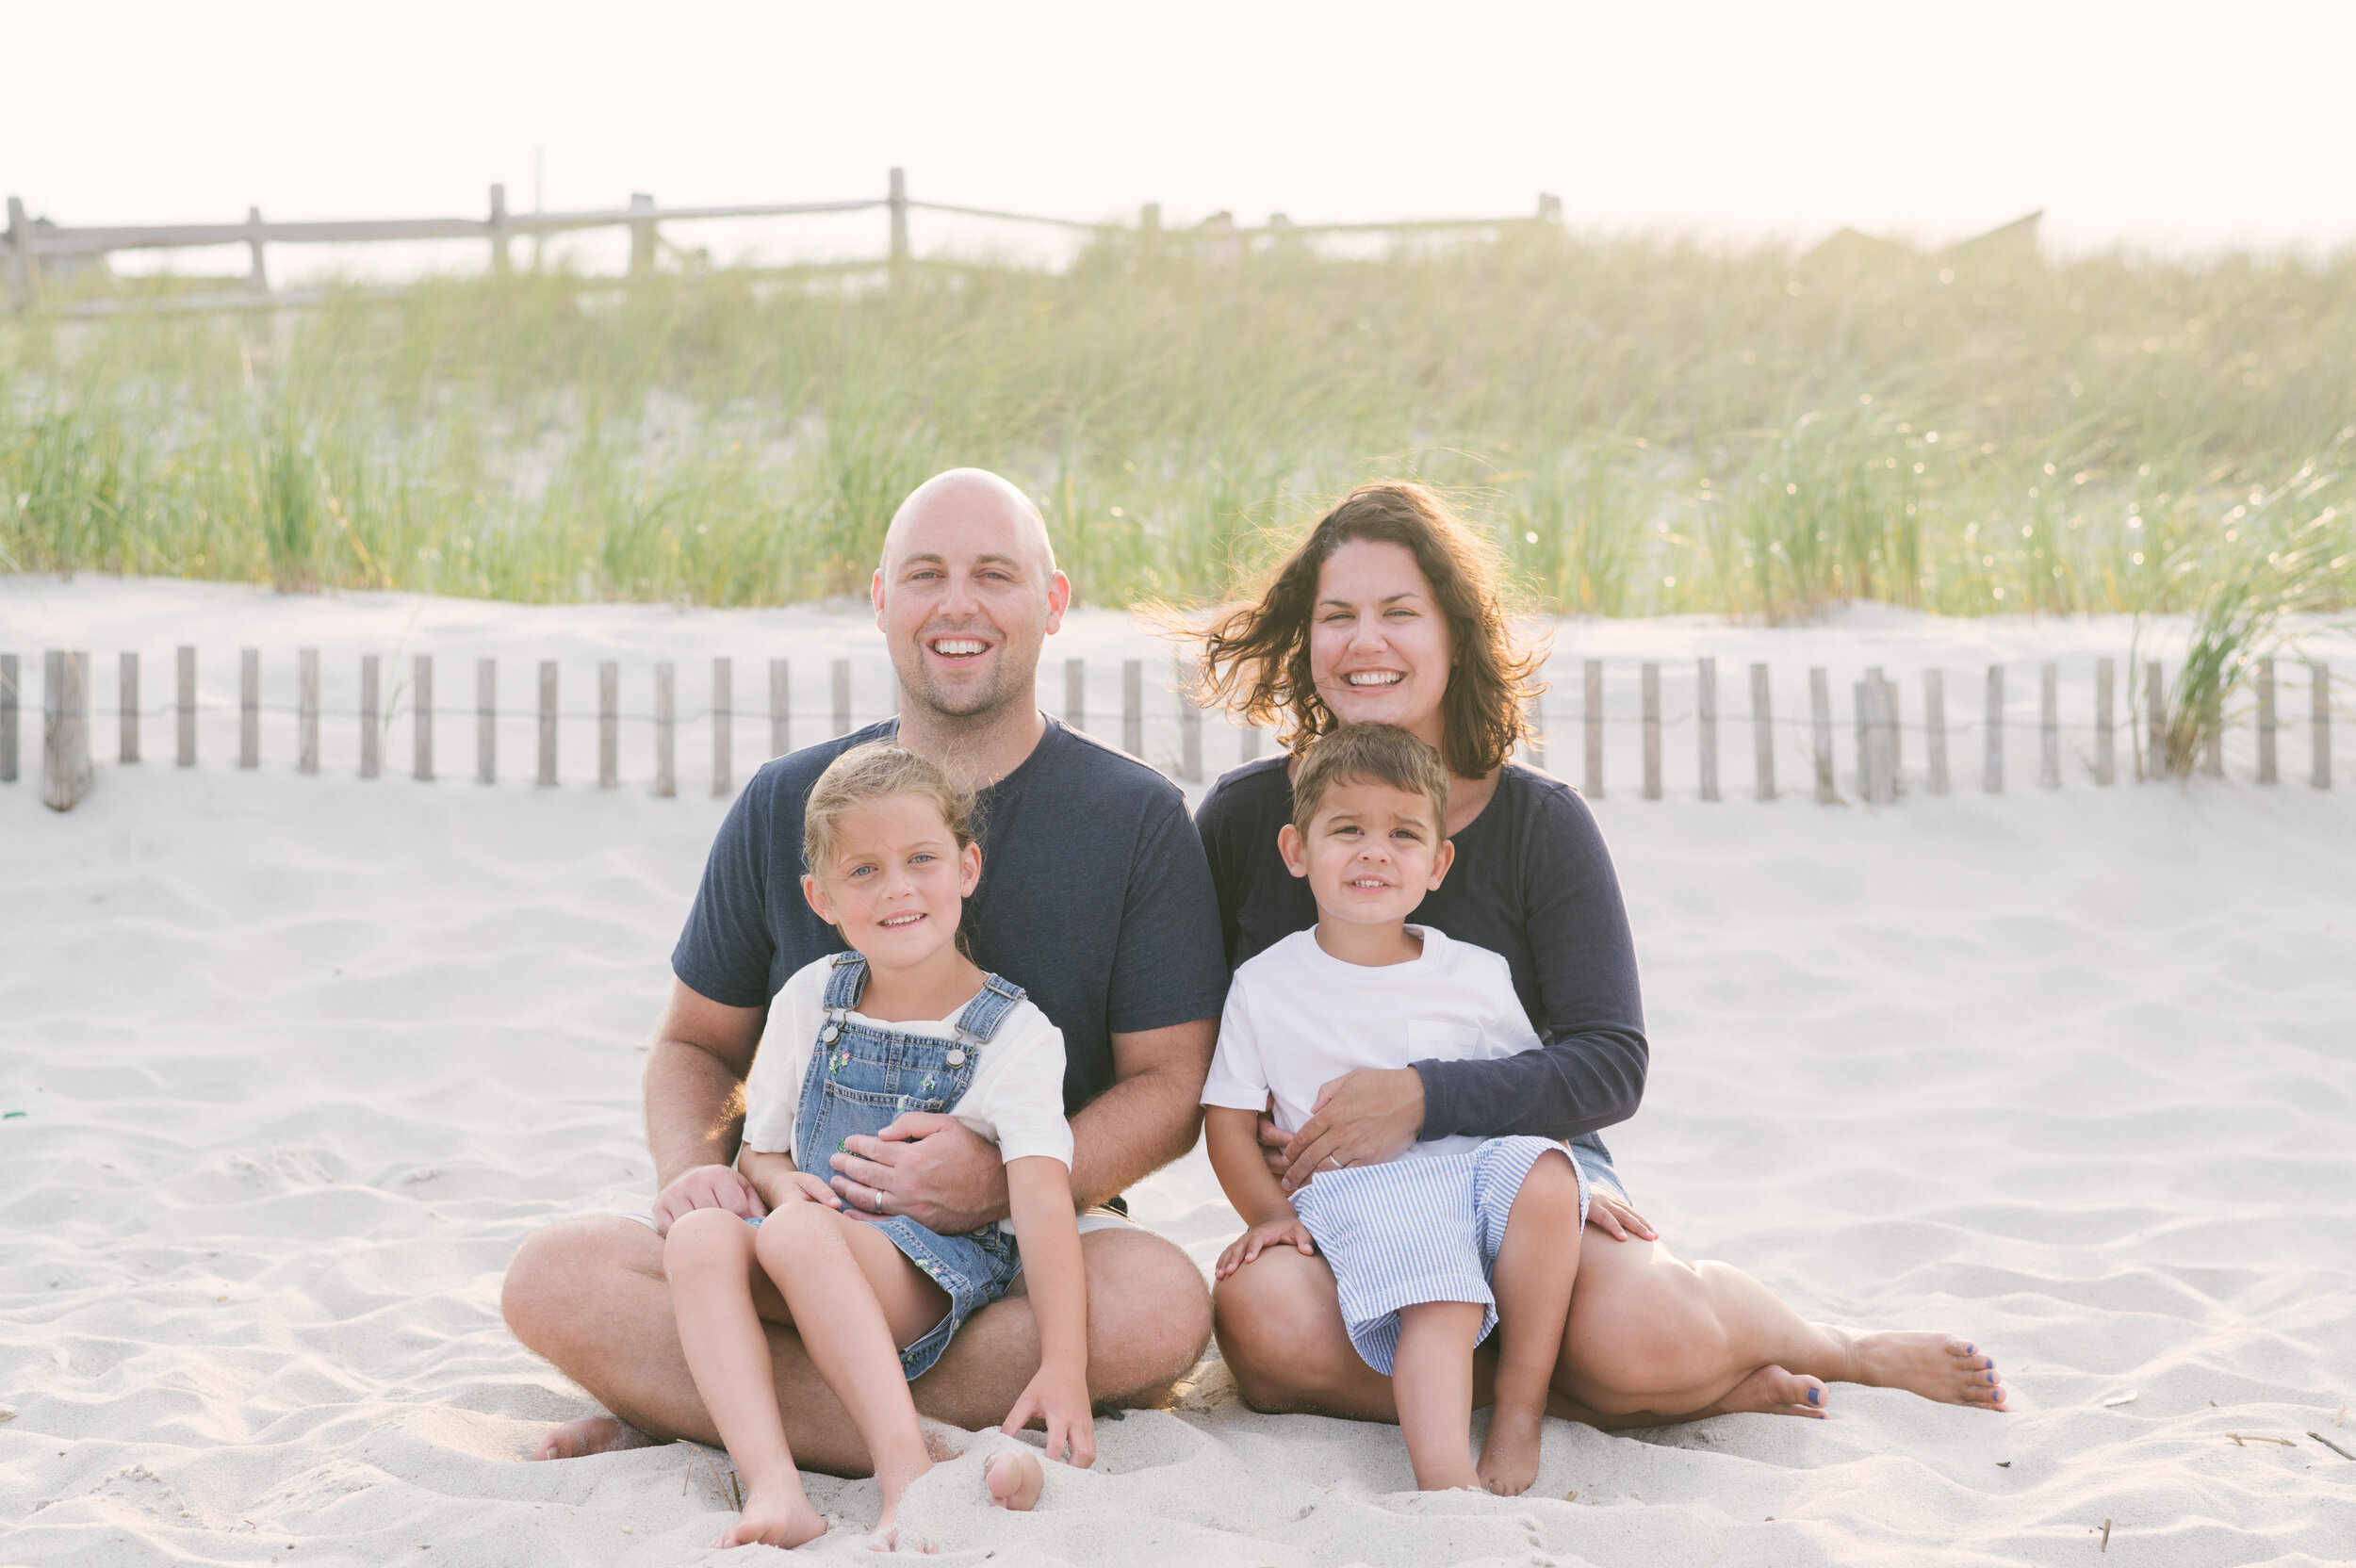 Beach photo ideas: Mom, dad, and two sons sitting on beach during photos  | NKB Photo